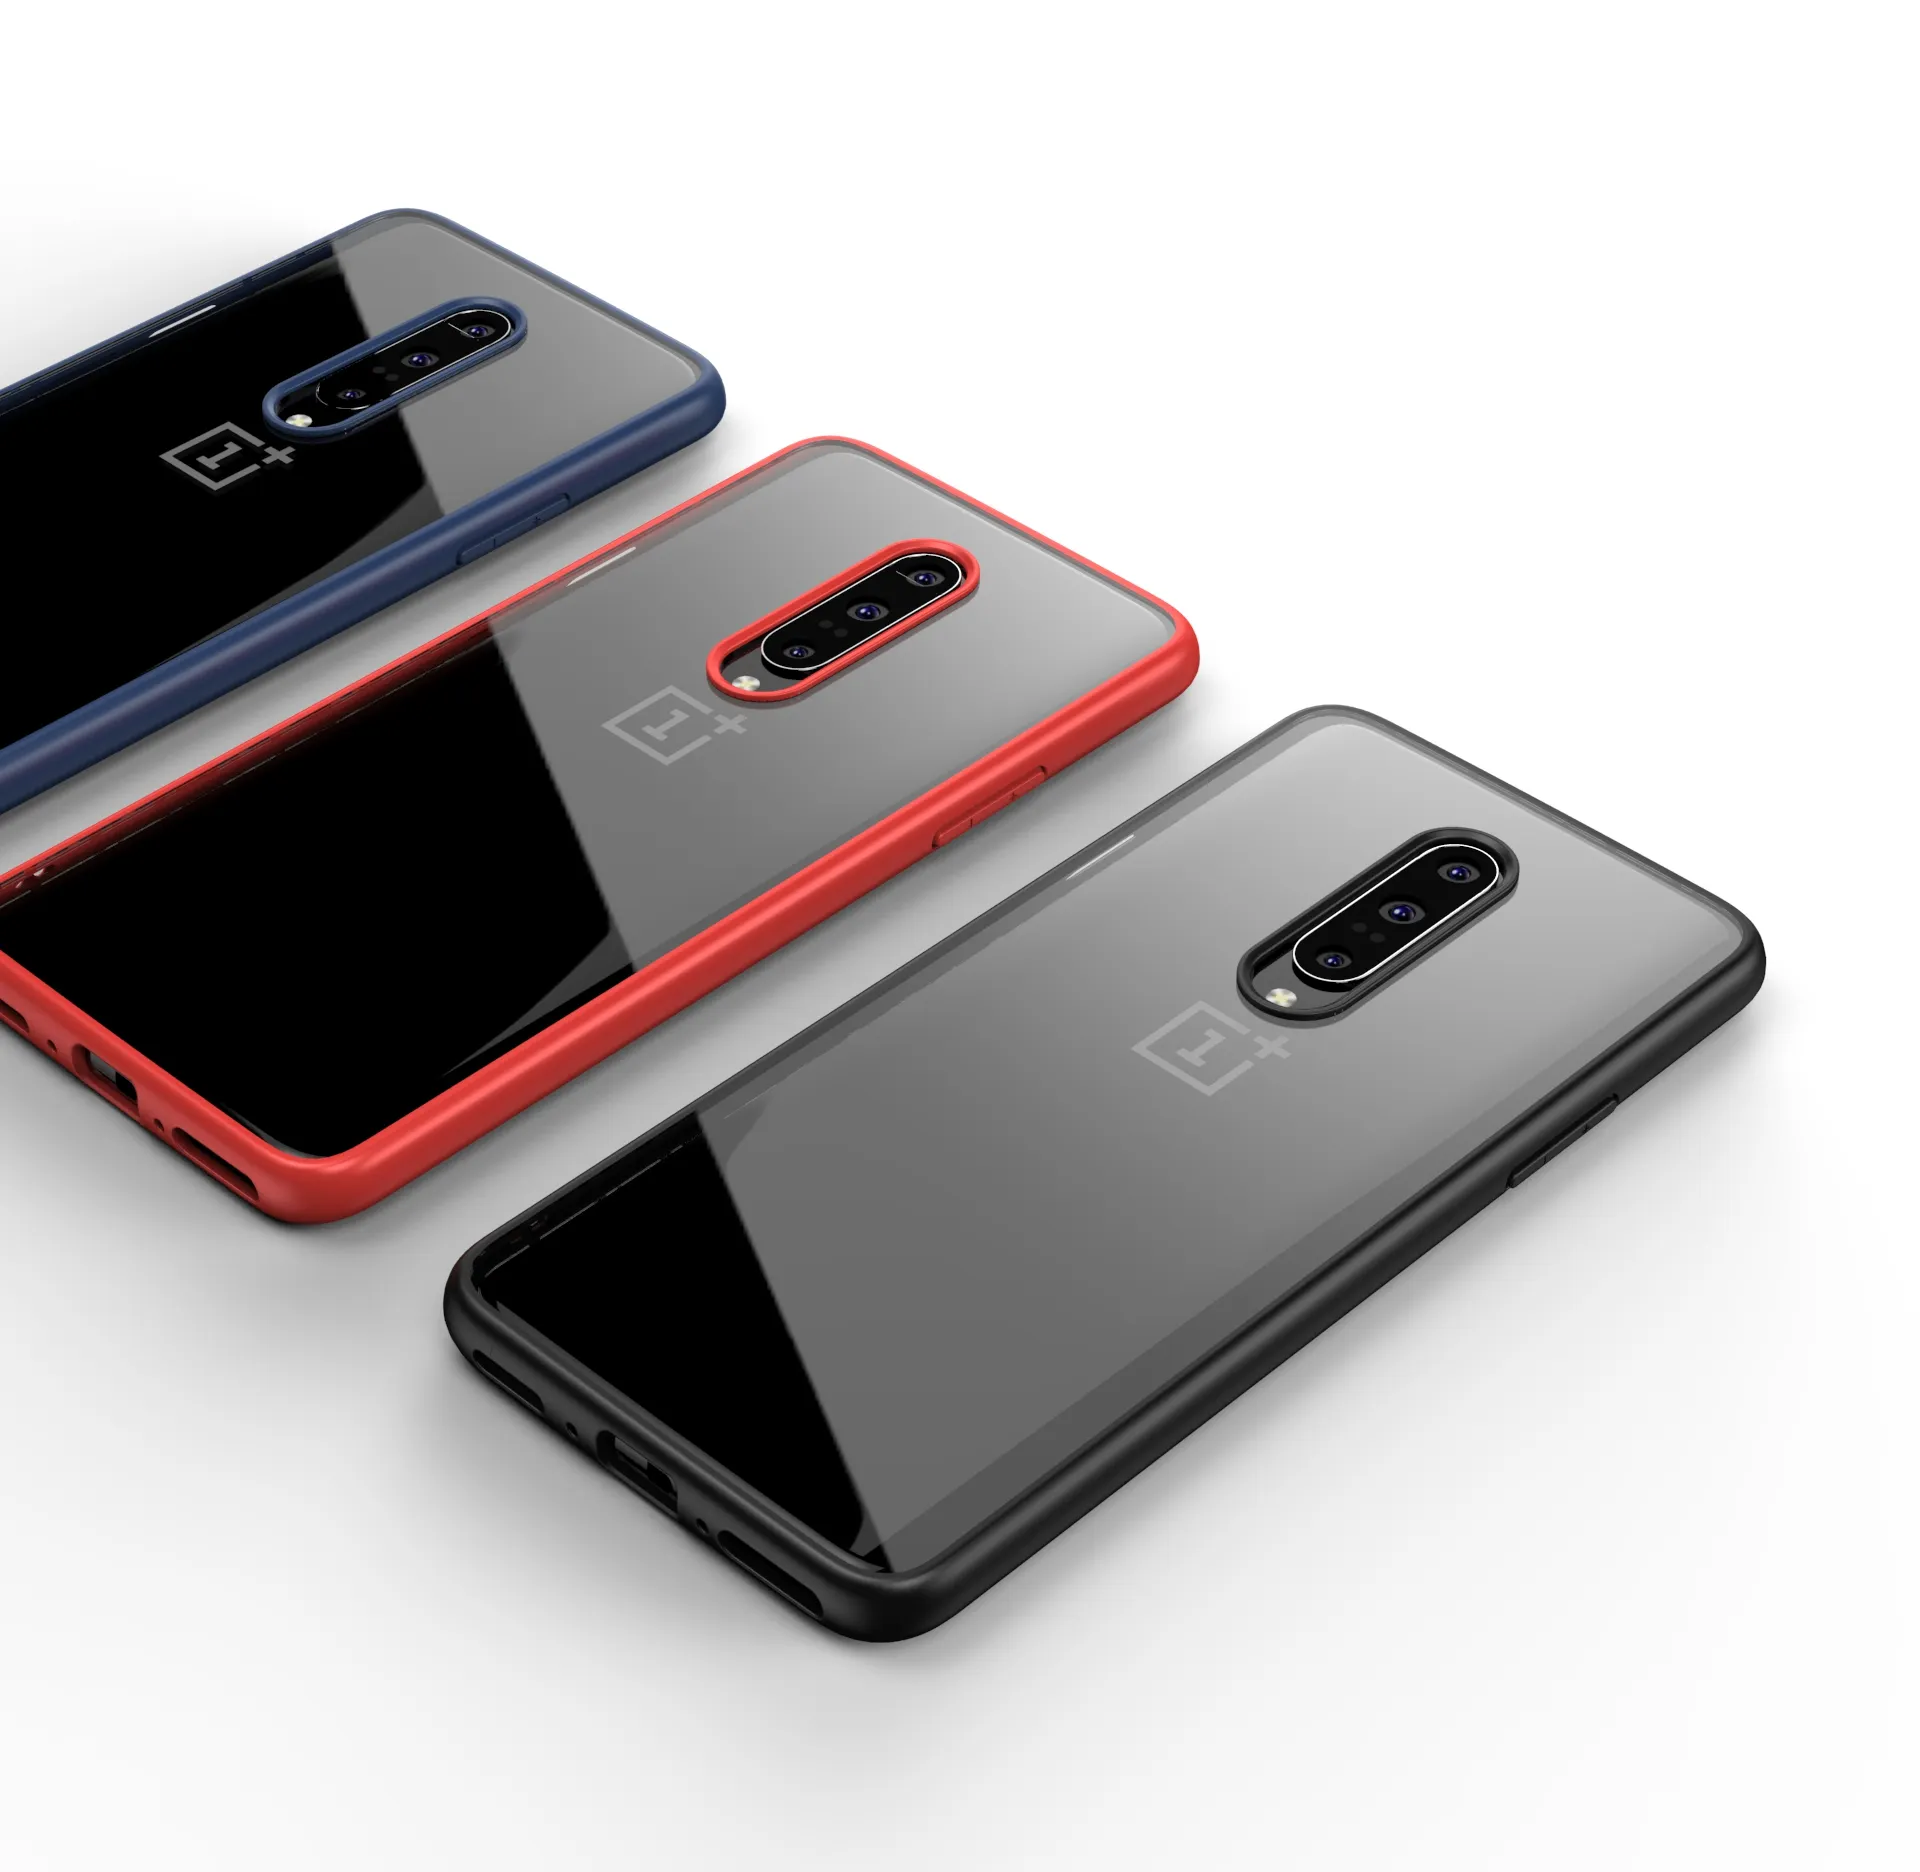 2019 Newest Bumper Cover For Oneplus 7 Cases In Bulk, For Oneplus 7 Case Tpu Pc